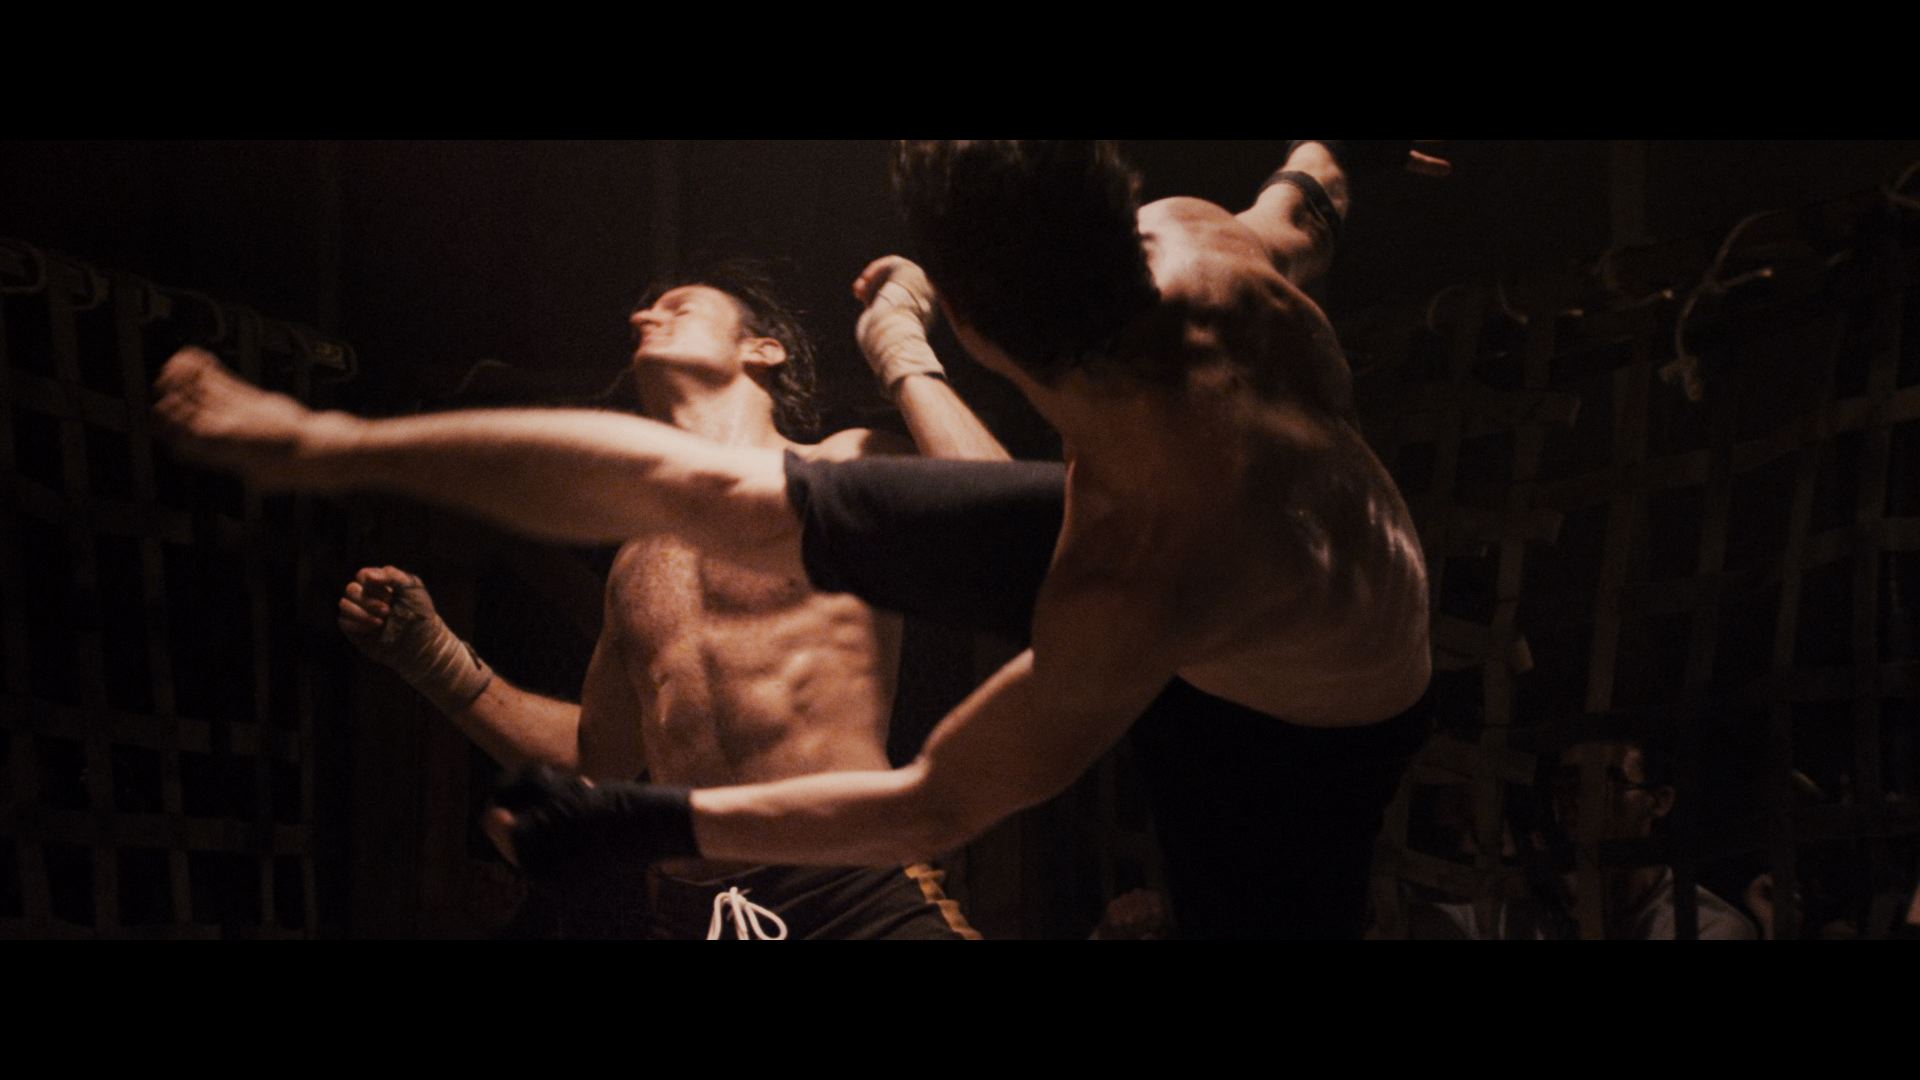 Still of Marc Senter and Nathan Grubbs from Brawler